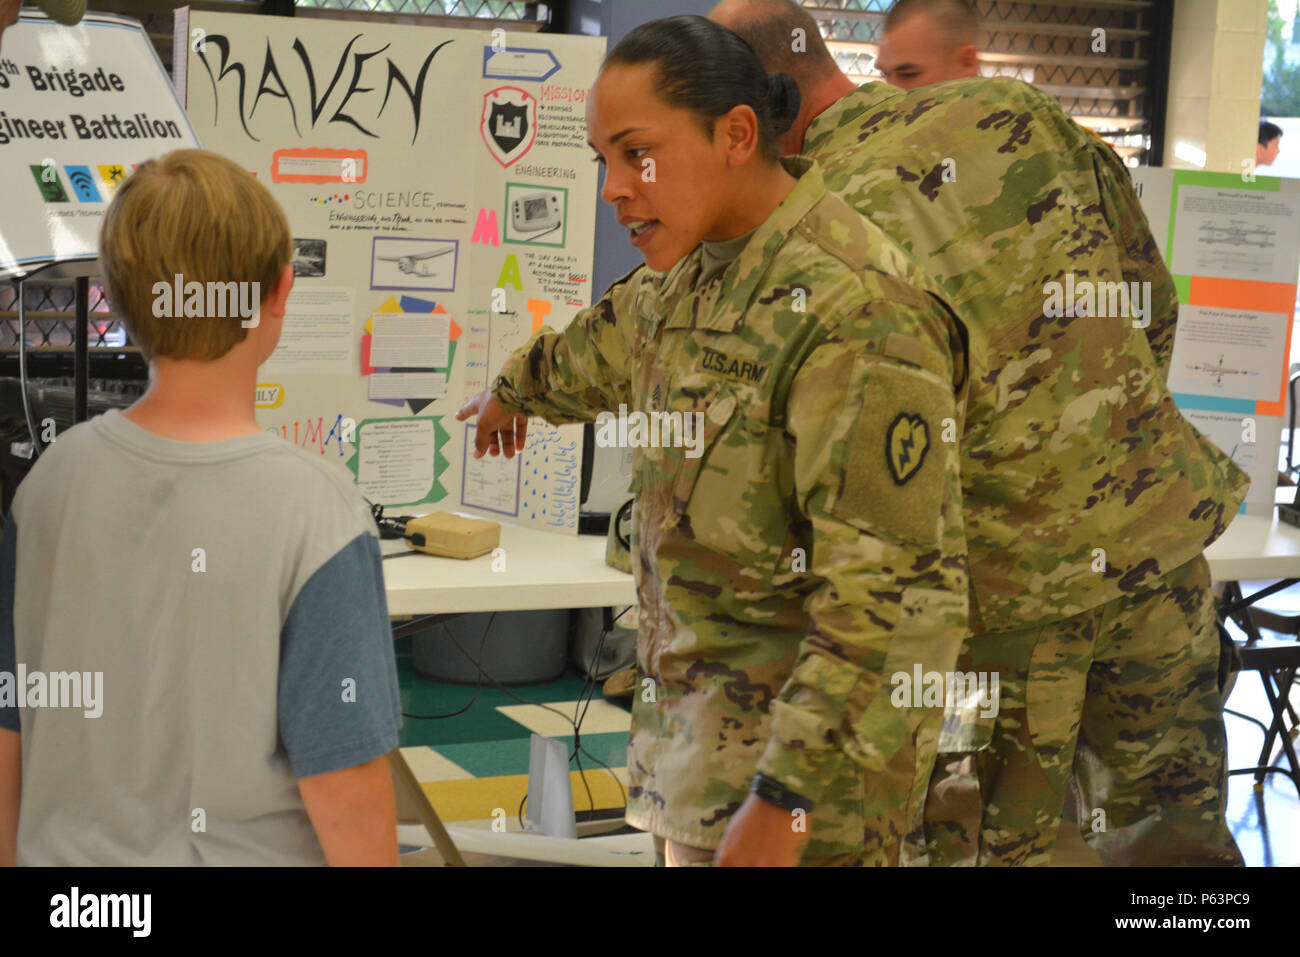 MILILANI, Hawaii – Sgt. Candice Jones, a combat engineer assigned to 65th Brigade Engineer Battalion, 2nd Brigade Combat Team, 25th Infantry Division, talks to a student about the RQ-11 Raven Unmanned Aircraft System during the science, technology, engineering and math education (STEM) night Apr. 9, 2016, at Mililani Middle School in Mililani, Hawaii. Events such as these improve relationships between Soldiers and the community and provides a chance for Soldiers to interact with families and students. (U.S. Army photo by Staff Sgt. Carlos Davis, 2nd Stryker Brigade Combat Team Public Affairs). Stock Photo